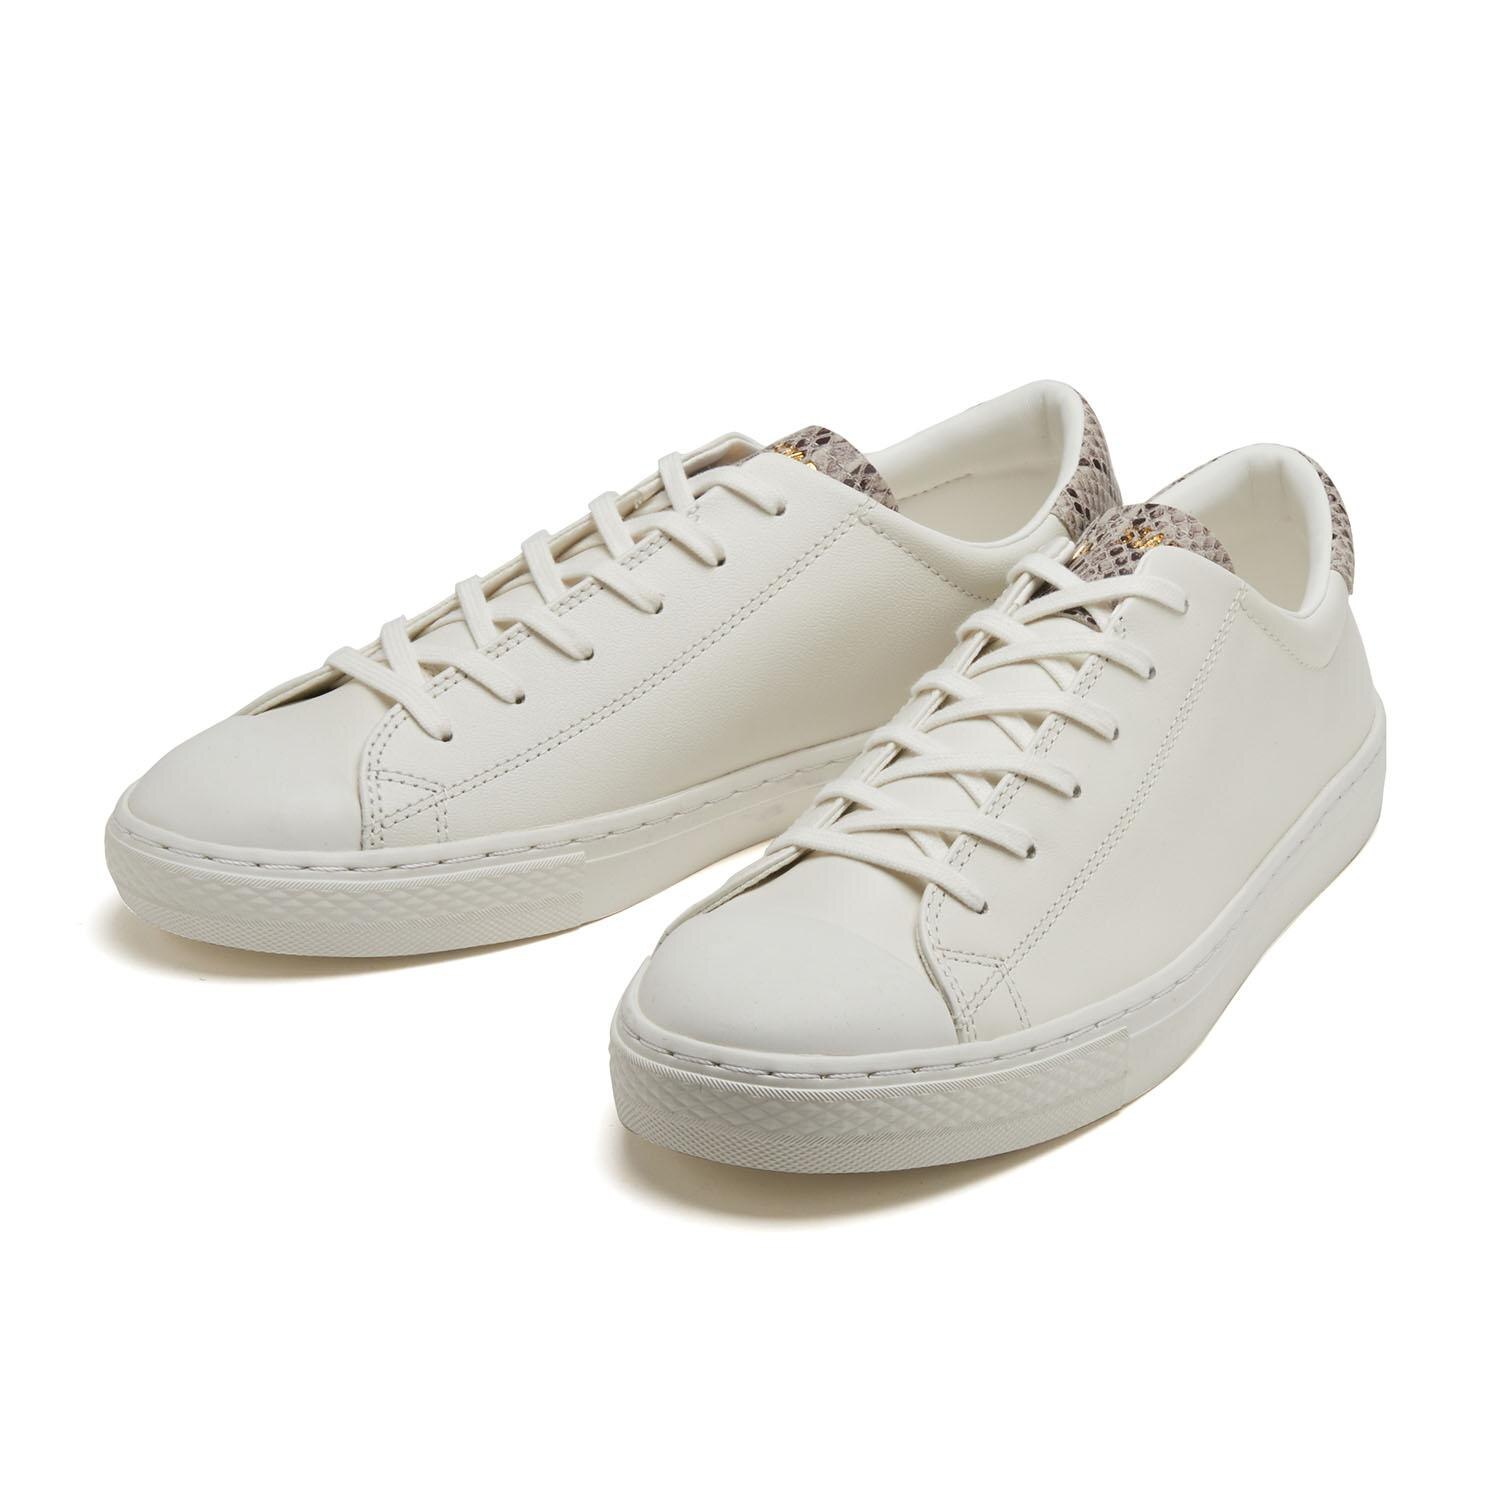 CONVERSE】AS COUPE POINT ANIMAL OX|ABC-MART(エービーシー・マート